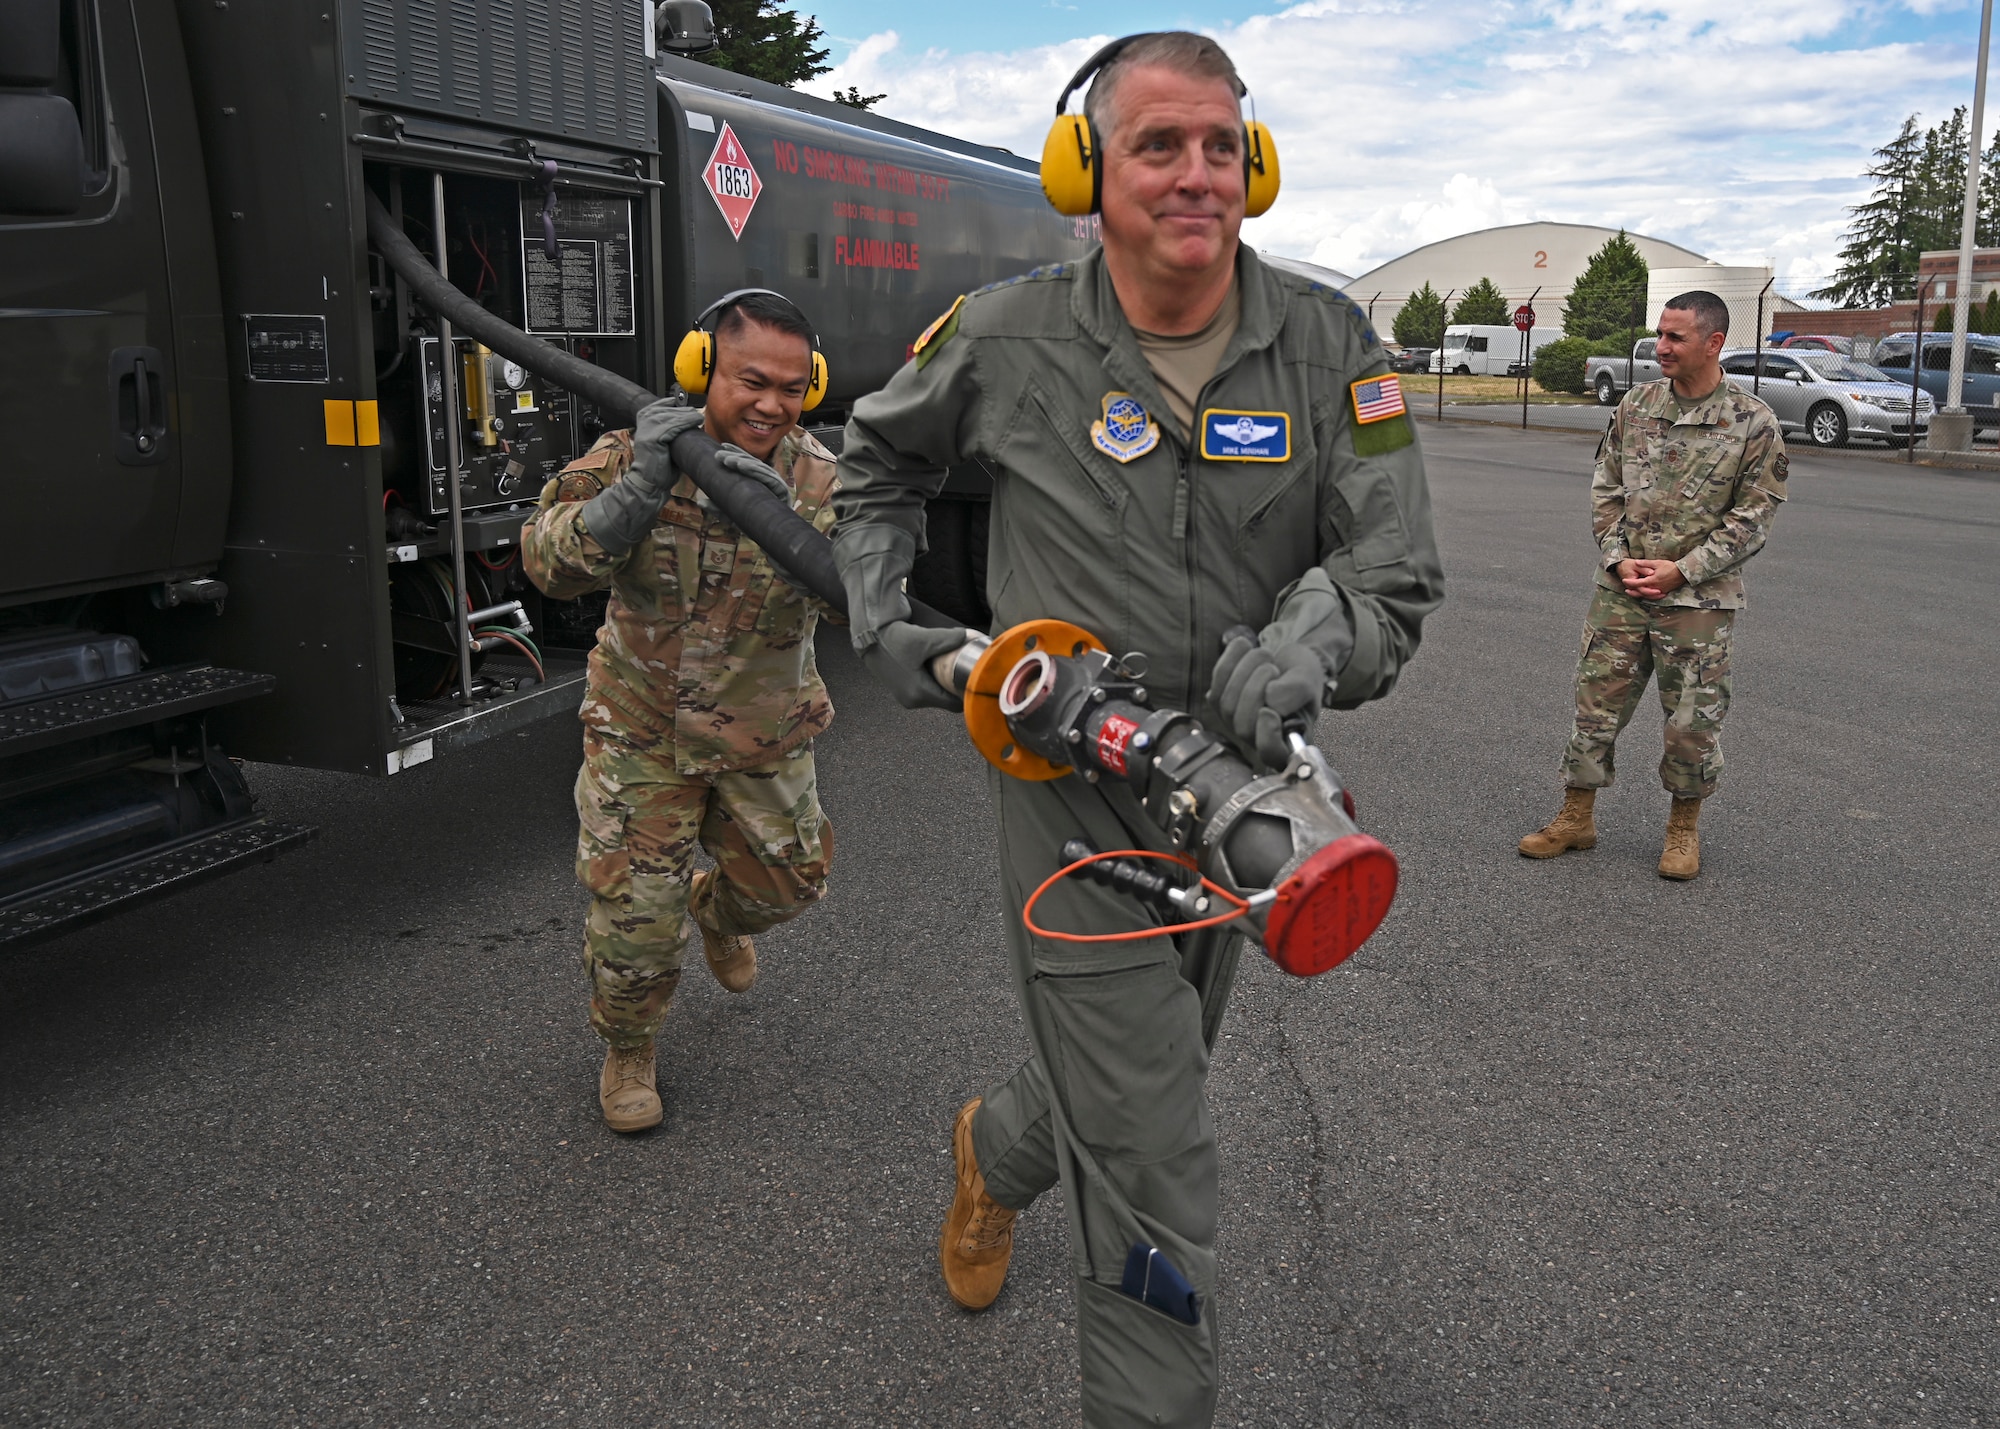 U.S. Air Force Tech. Sgt. Jeffrey Panen, left, fuels service center NCO in charge with the 627th Logistics Readiness Squadron, and Gen. Mike Minihan, Air Mobility Command commander, simulate a refueling at Joint Base Lewis-McChord, Washington, July 7, 2022. Minihan and Chief Master Sgt. Brian Kruzelnick, AMC command chief, spent two days visiting Team McChord to experience the way America’s Airlift Wing executes rapid global mobility. (U.S. Air Force photo by Senior Airman Callie Norton)